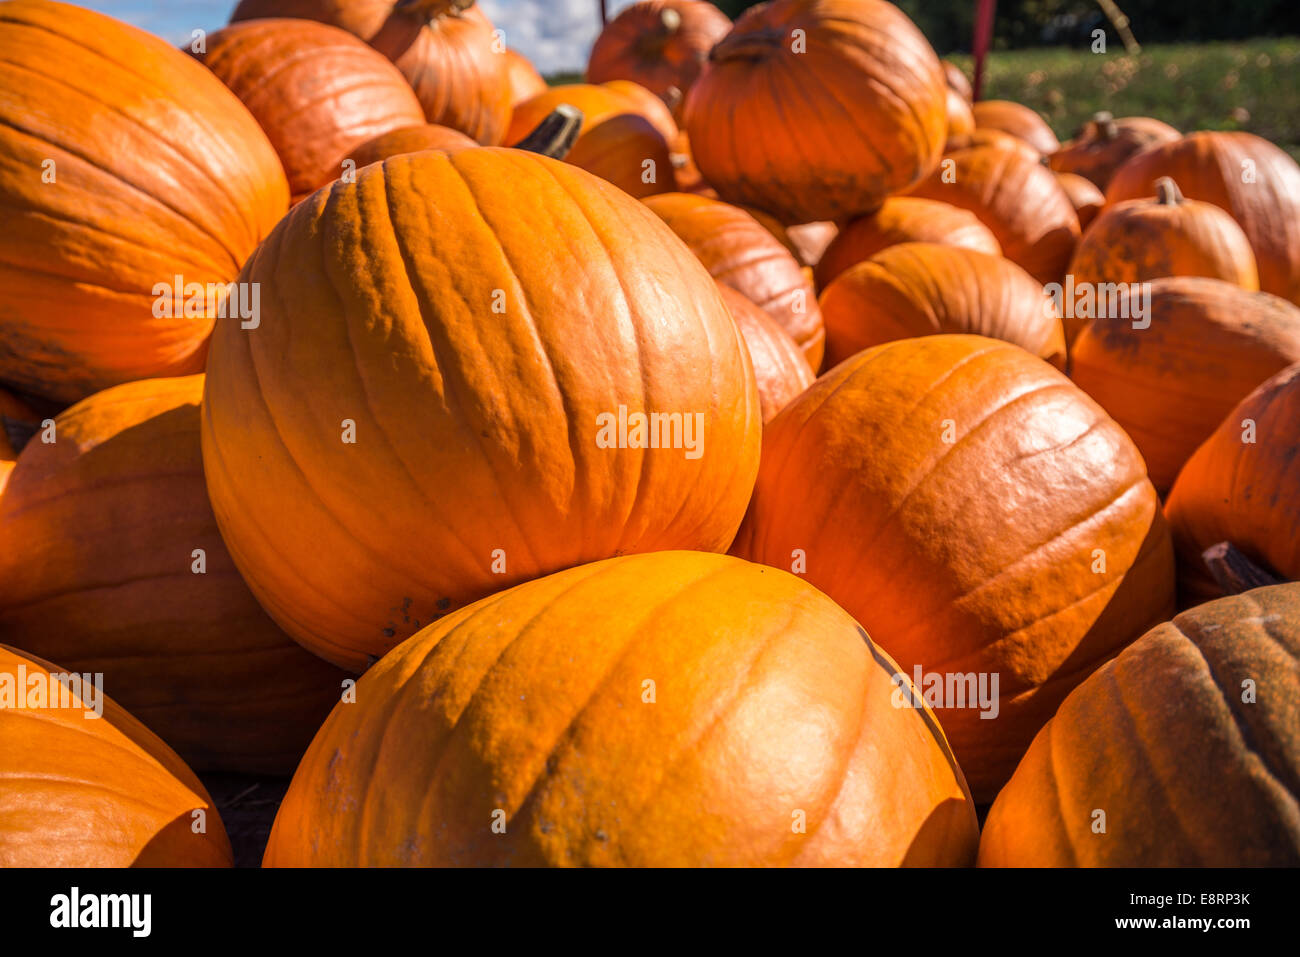 Pumpkins stacked in a farmers field. Stock Photo